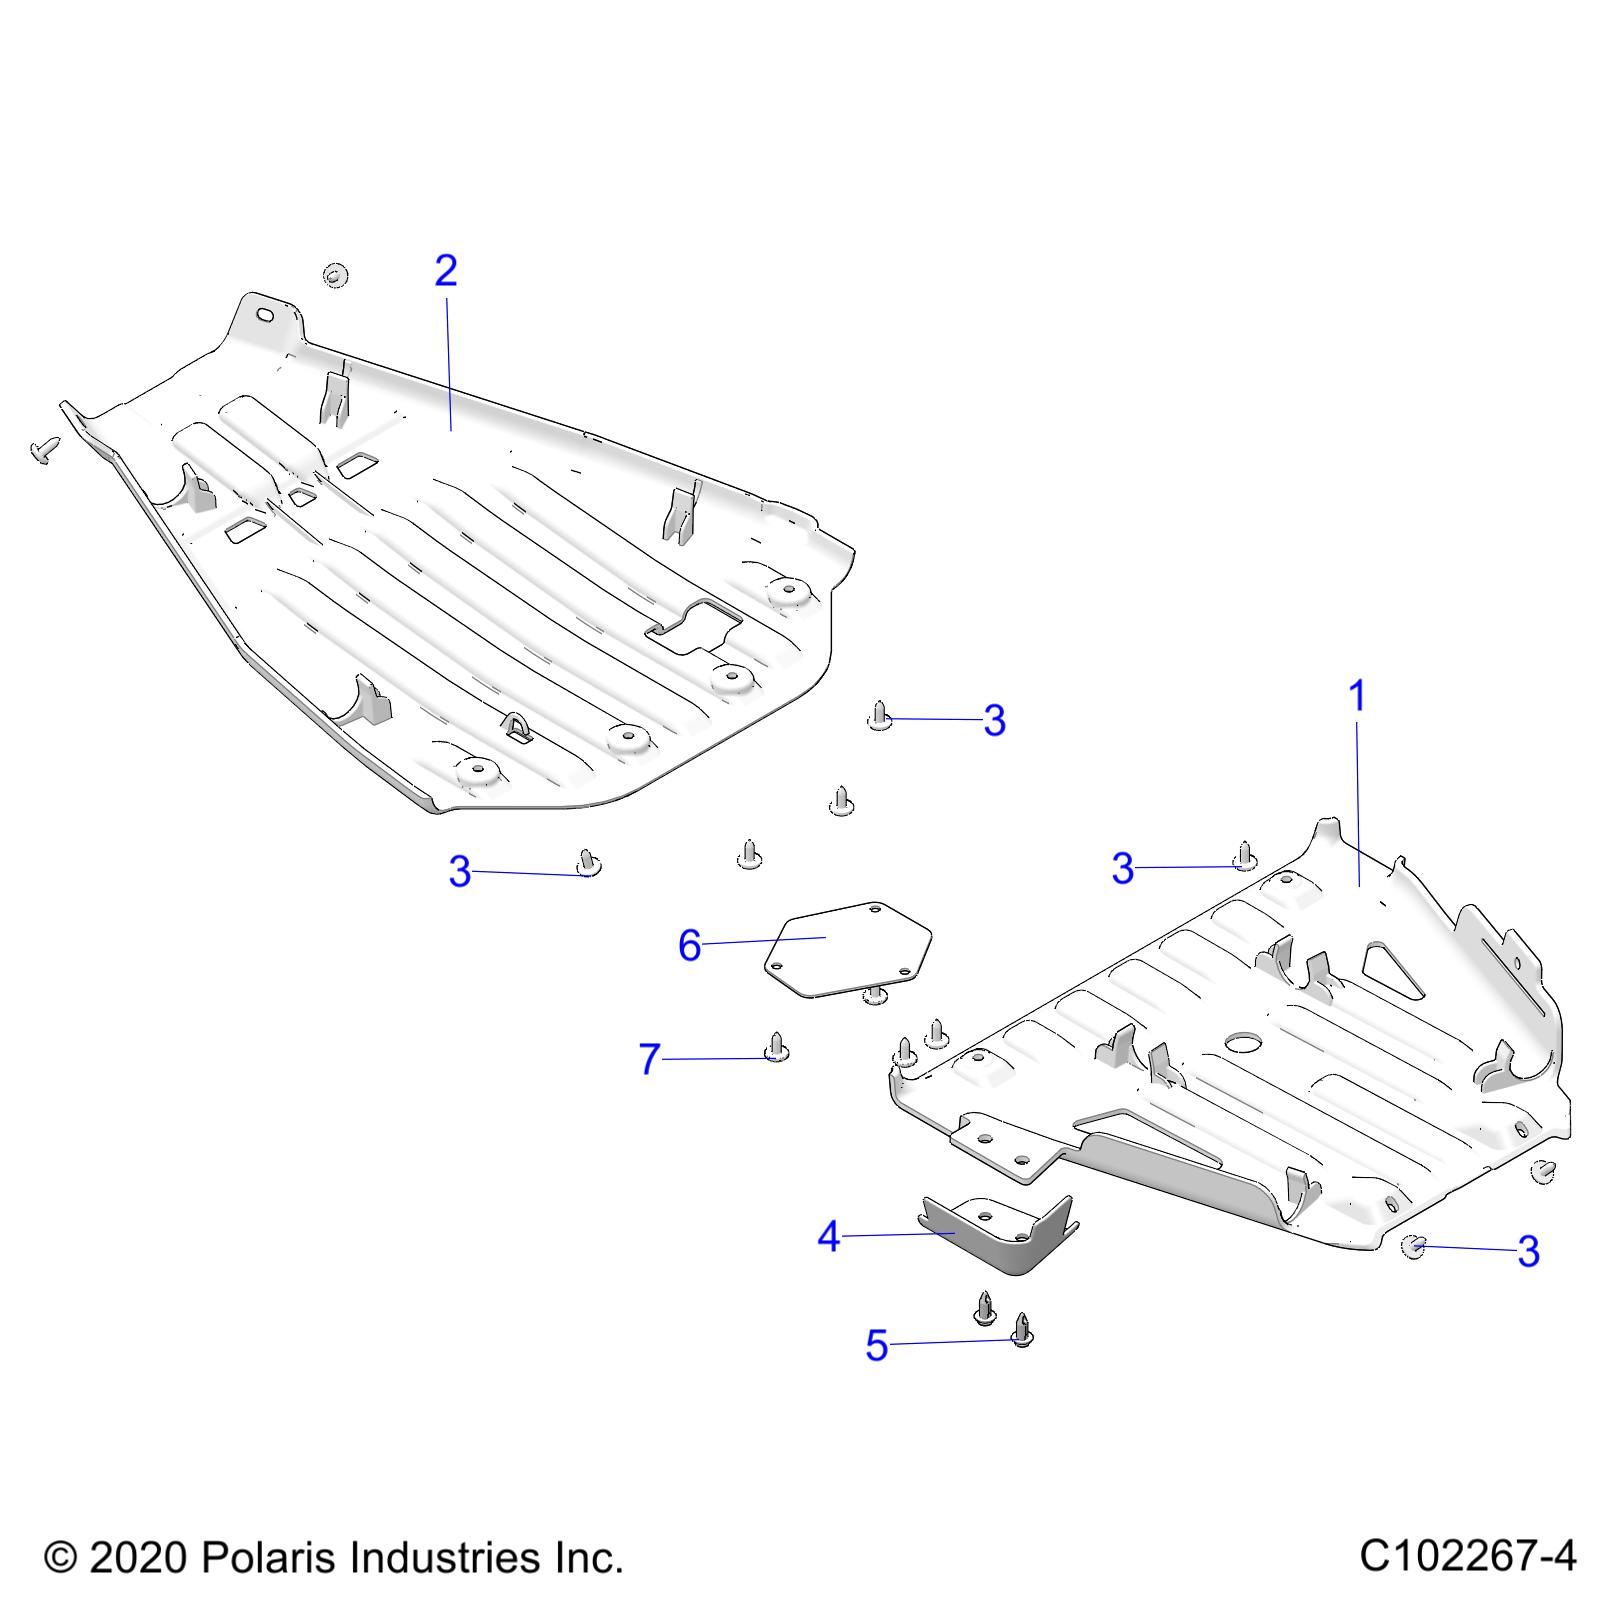 Part Number : 5256950 OIL FILTER PLATE GUARD